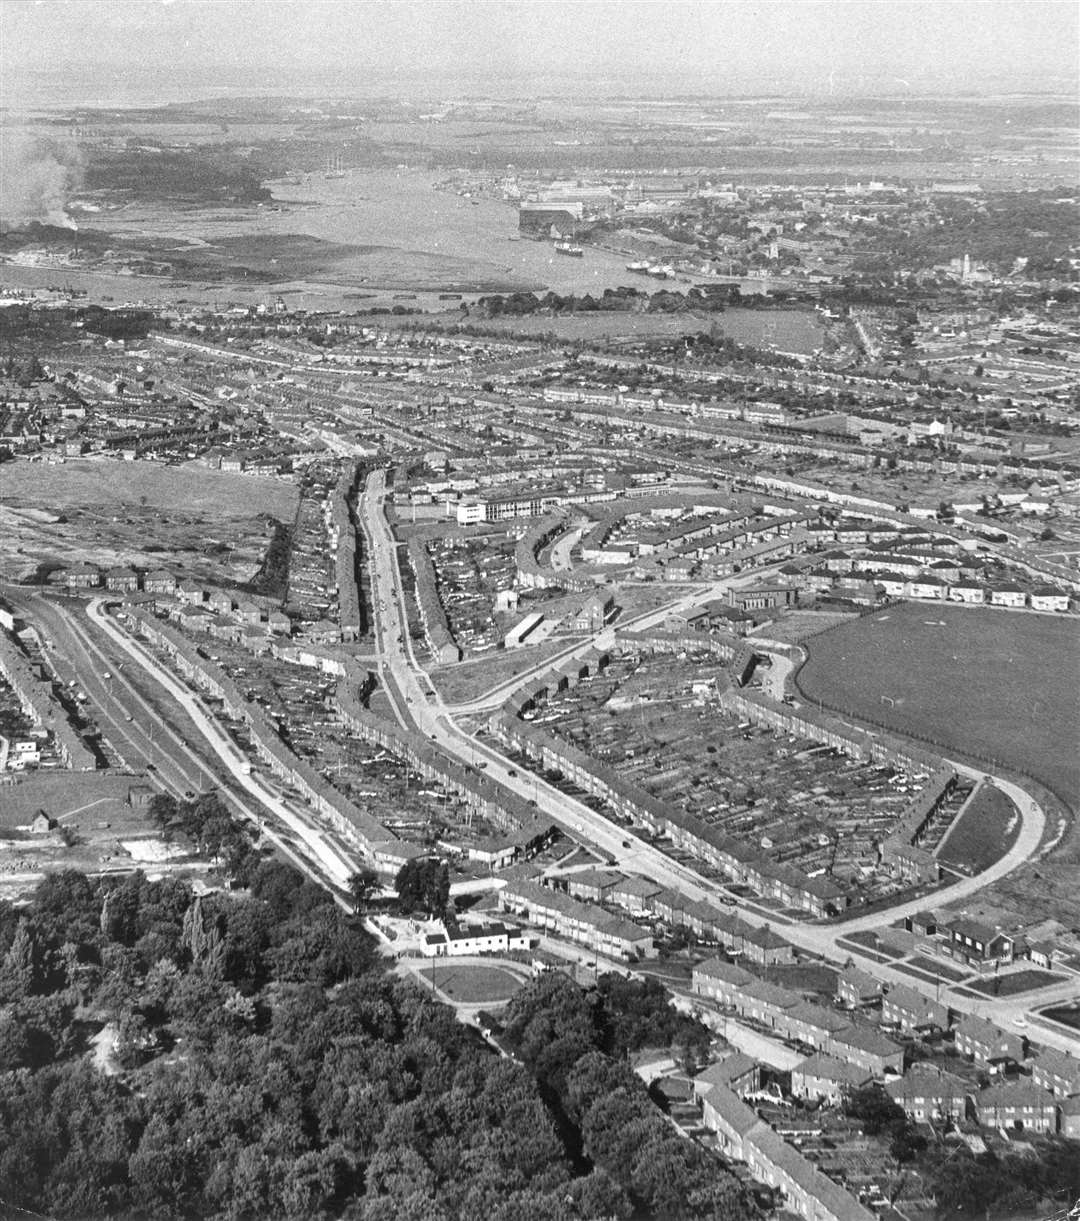 A 1962 aerial view of the Warren Wood Estate, Rochester